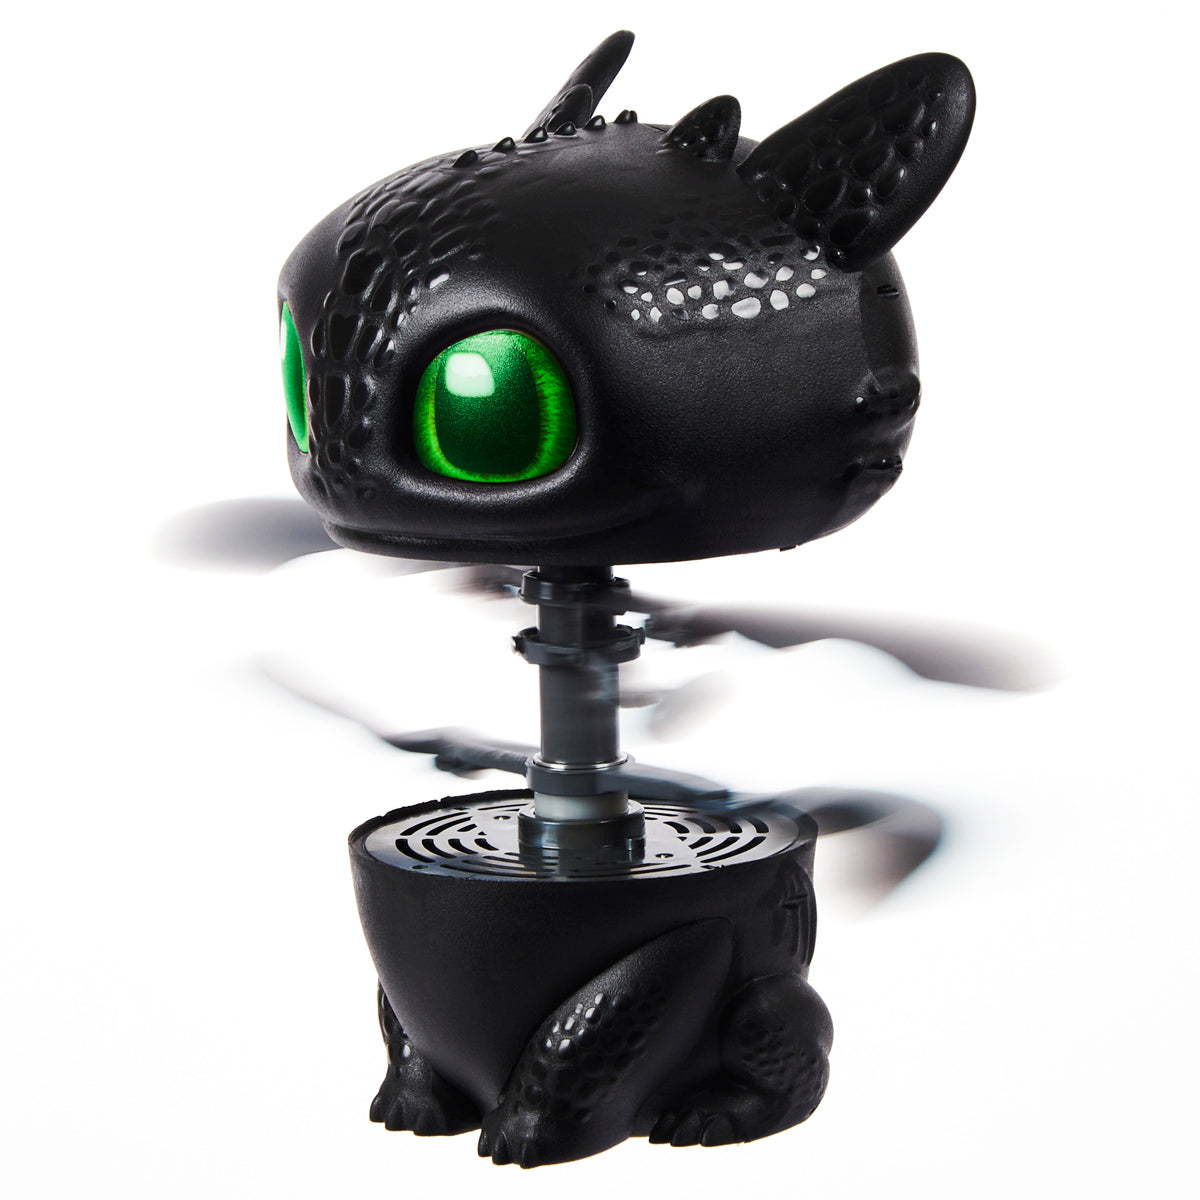 DreamWorks Dragons Flying Toothless